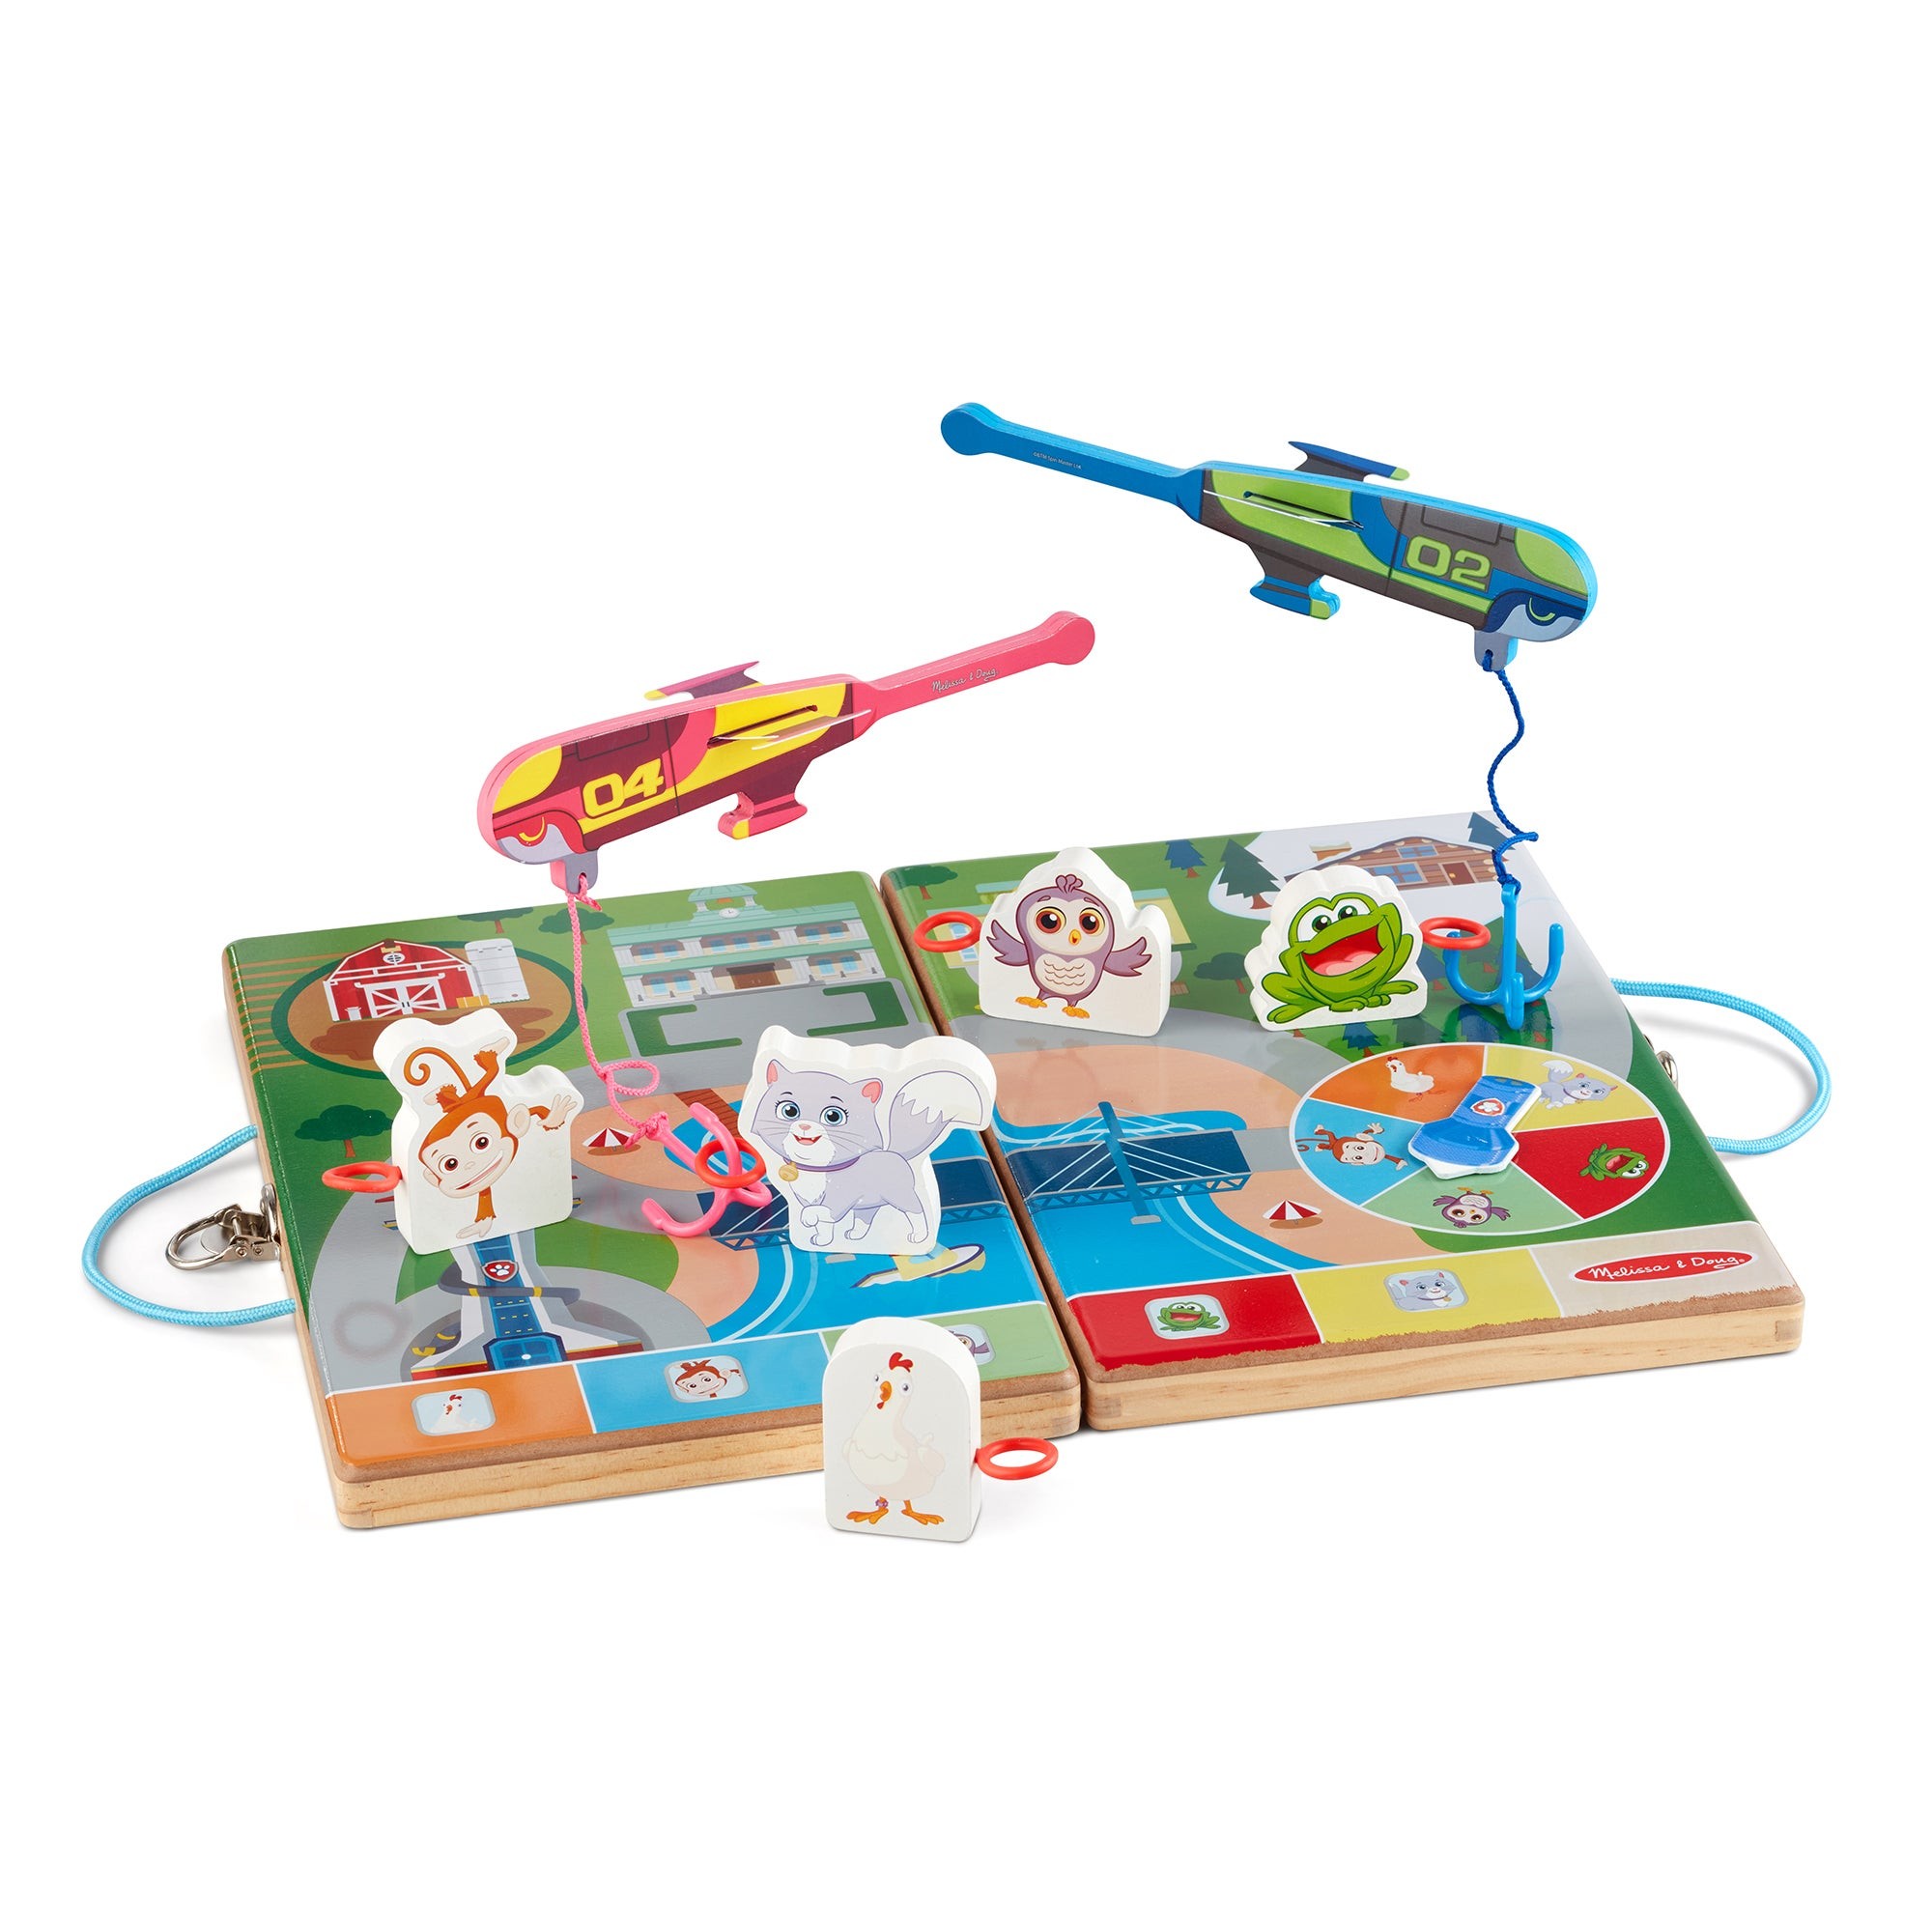 Paw Patrol Spy Find & Rescue Play Set Ages 3-5 Years